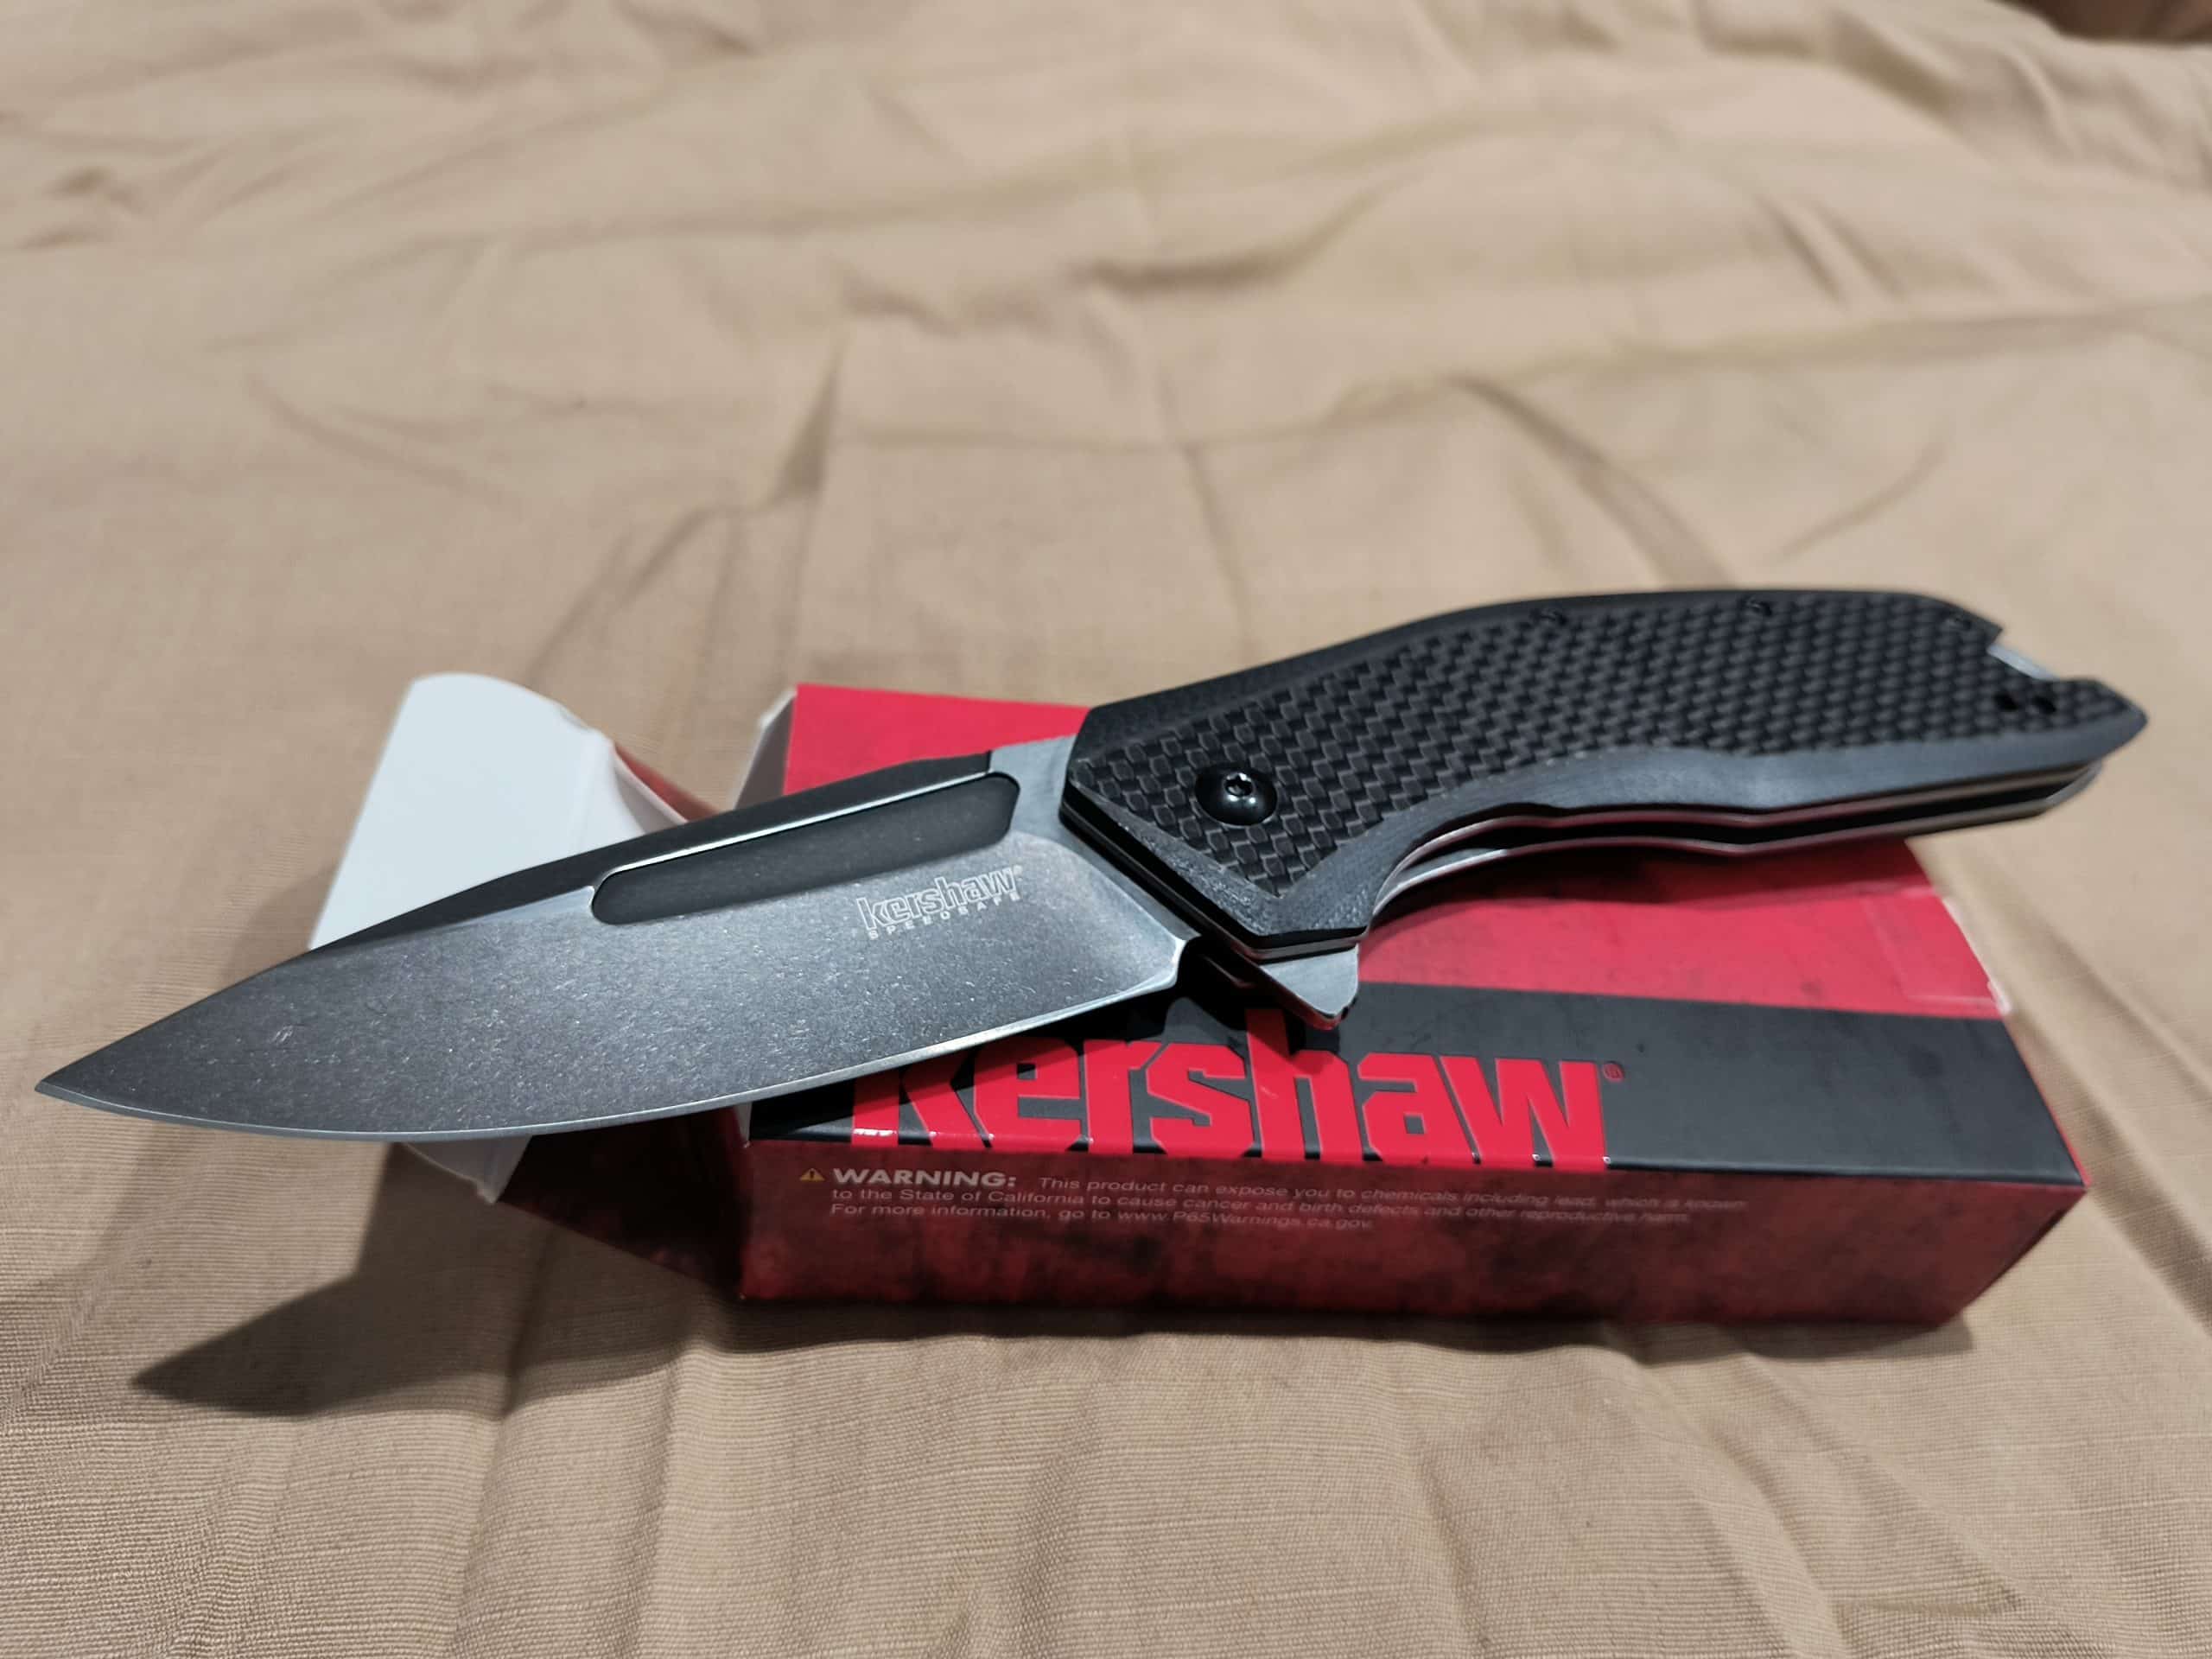 Kershaw Flourish Pocket Knife (3935); 3.5-Inch Blackwash Clip Point Blade With Black Carbon Fiber Handle; Features SpeedSafe Assisted Opening, Flipper, Lanyard Hole And Reversible Pocket Clip; 5.3 OZ.